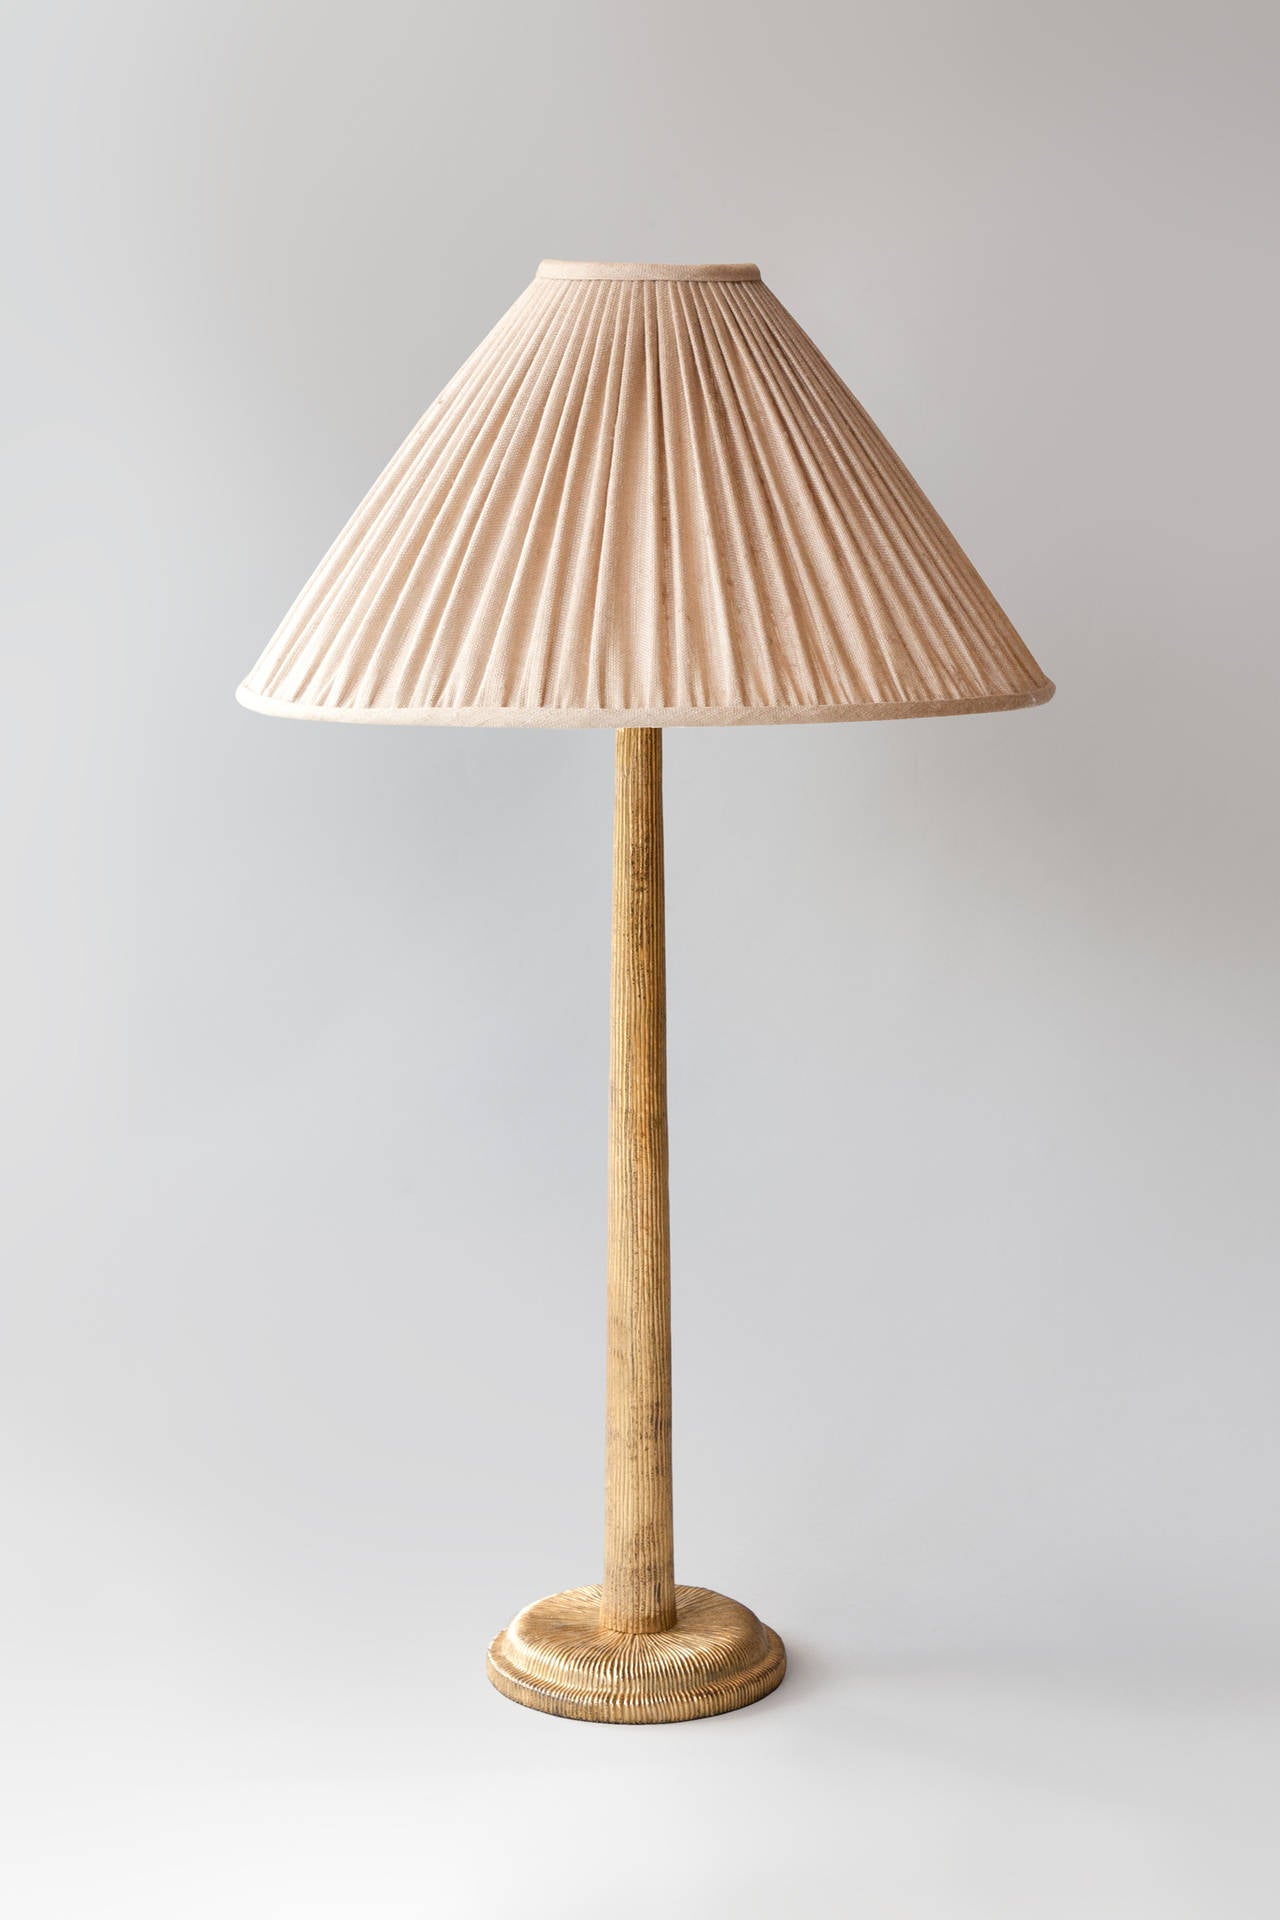 Horbury Table Lamp In Excellent Condition For Sale In London, GB